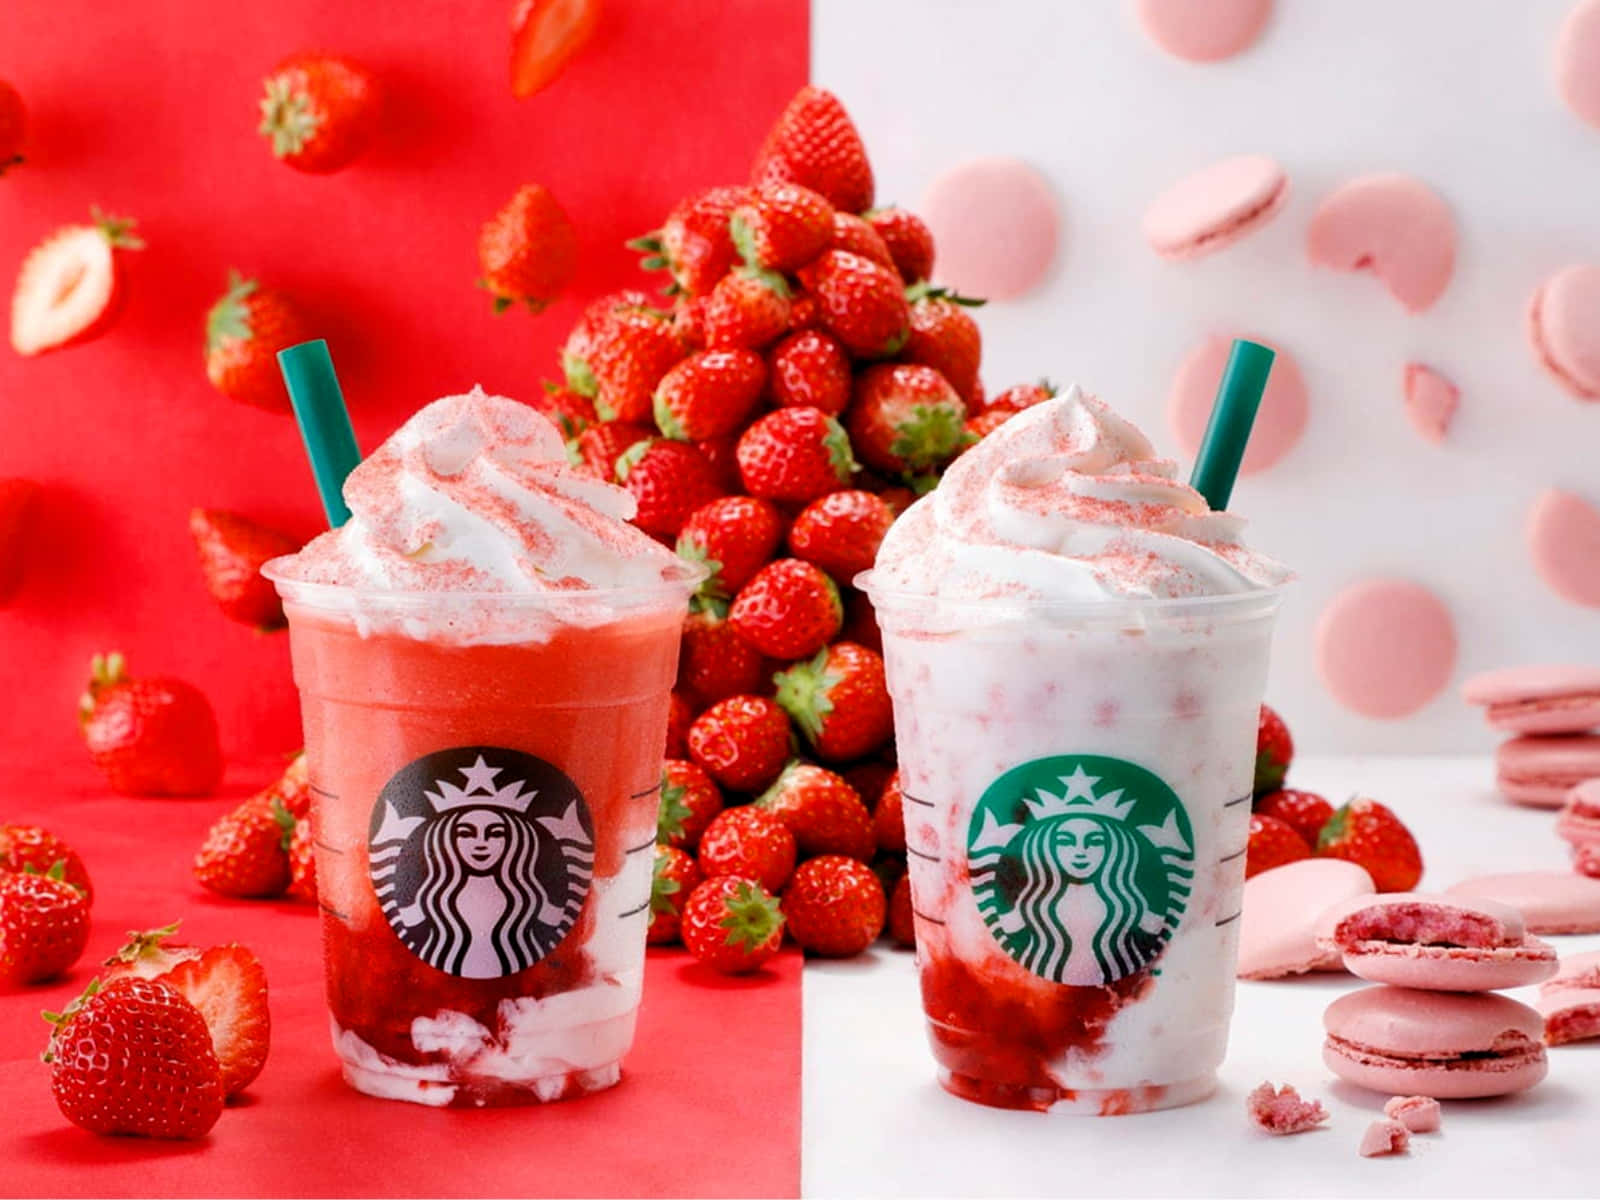 Enjoy a cup of Starbucks with friends